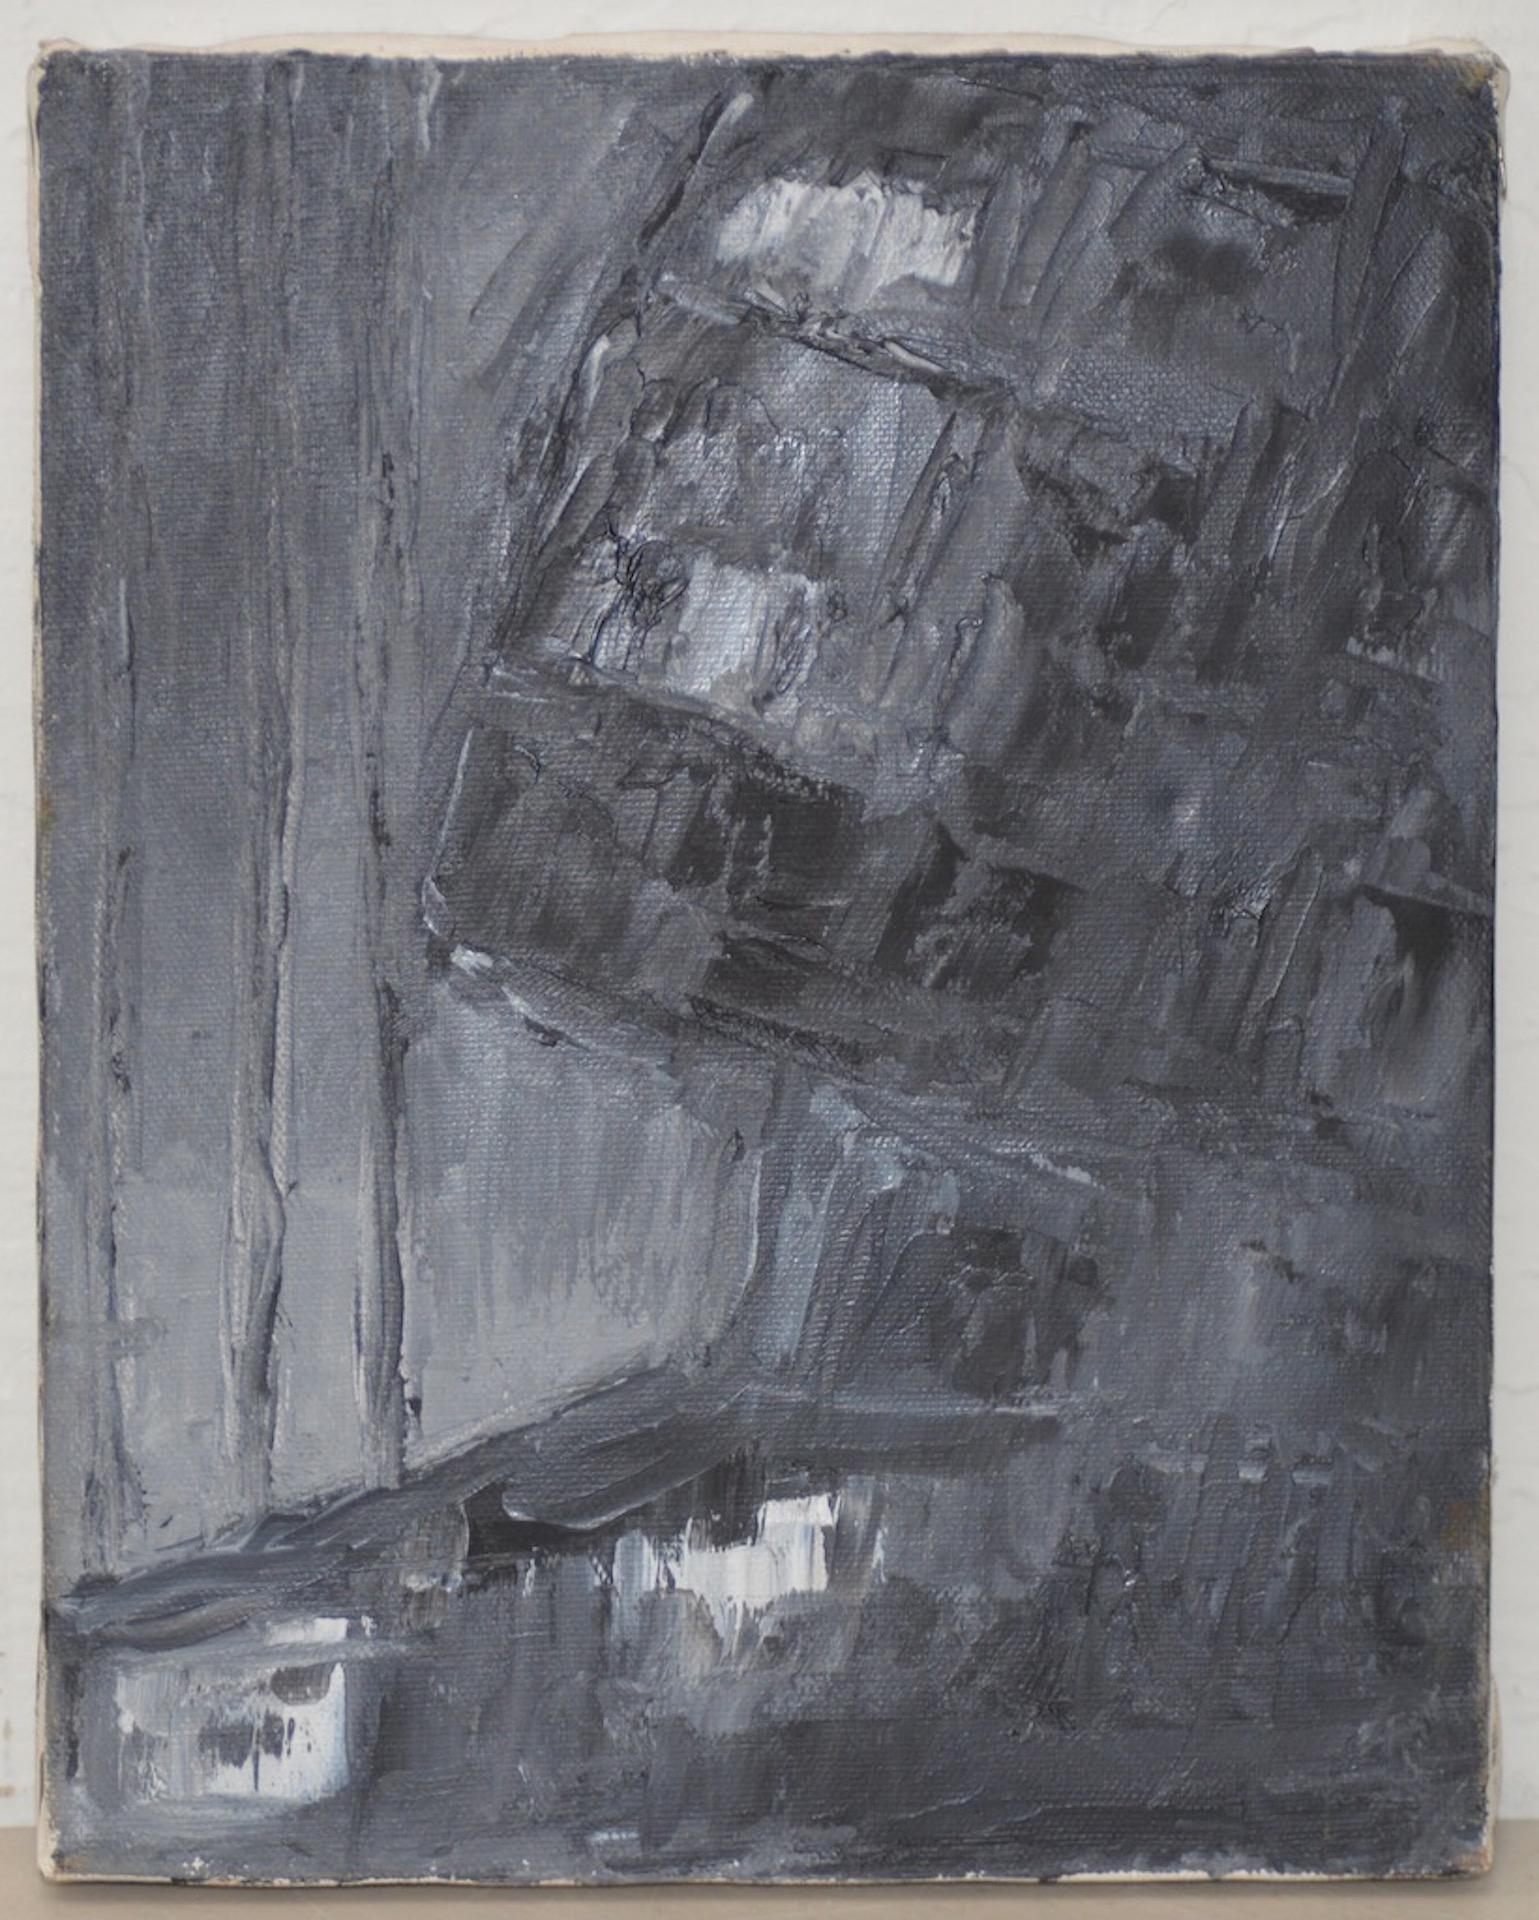 Arthur J. Krakower (1921-2009) "Black and Gray Abstract" Original Oil on Canvas c.1998  

Original oil on canvas by celebrated octogenarian artist Arthur J. Krakower.  

Dimensions 8" x 10". Signed and dated on the back.  Very good condition. 